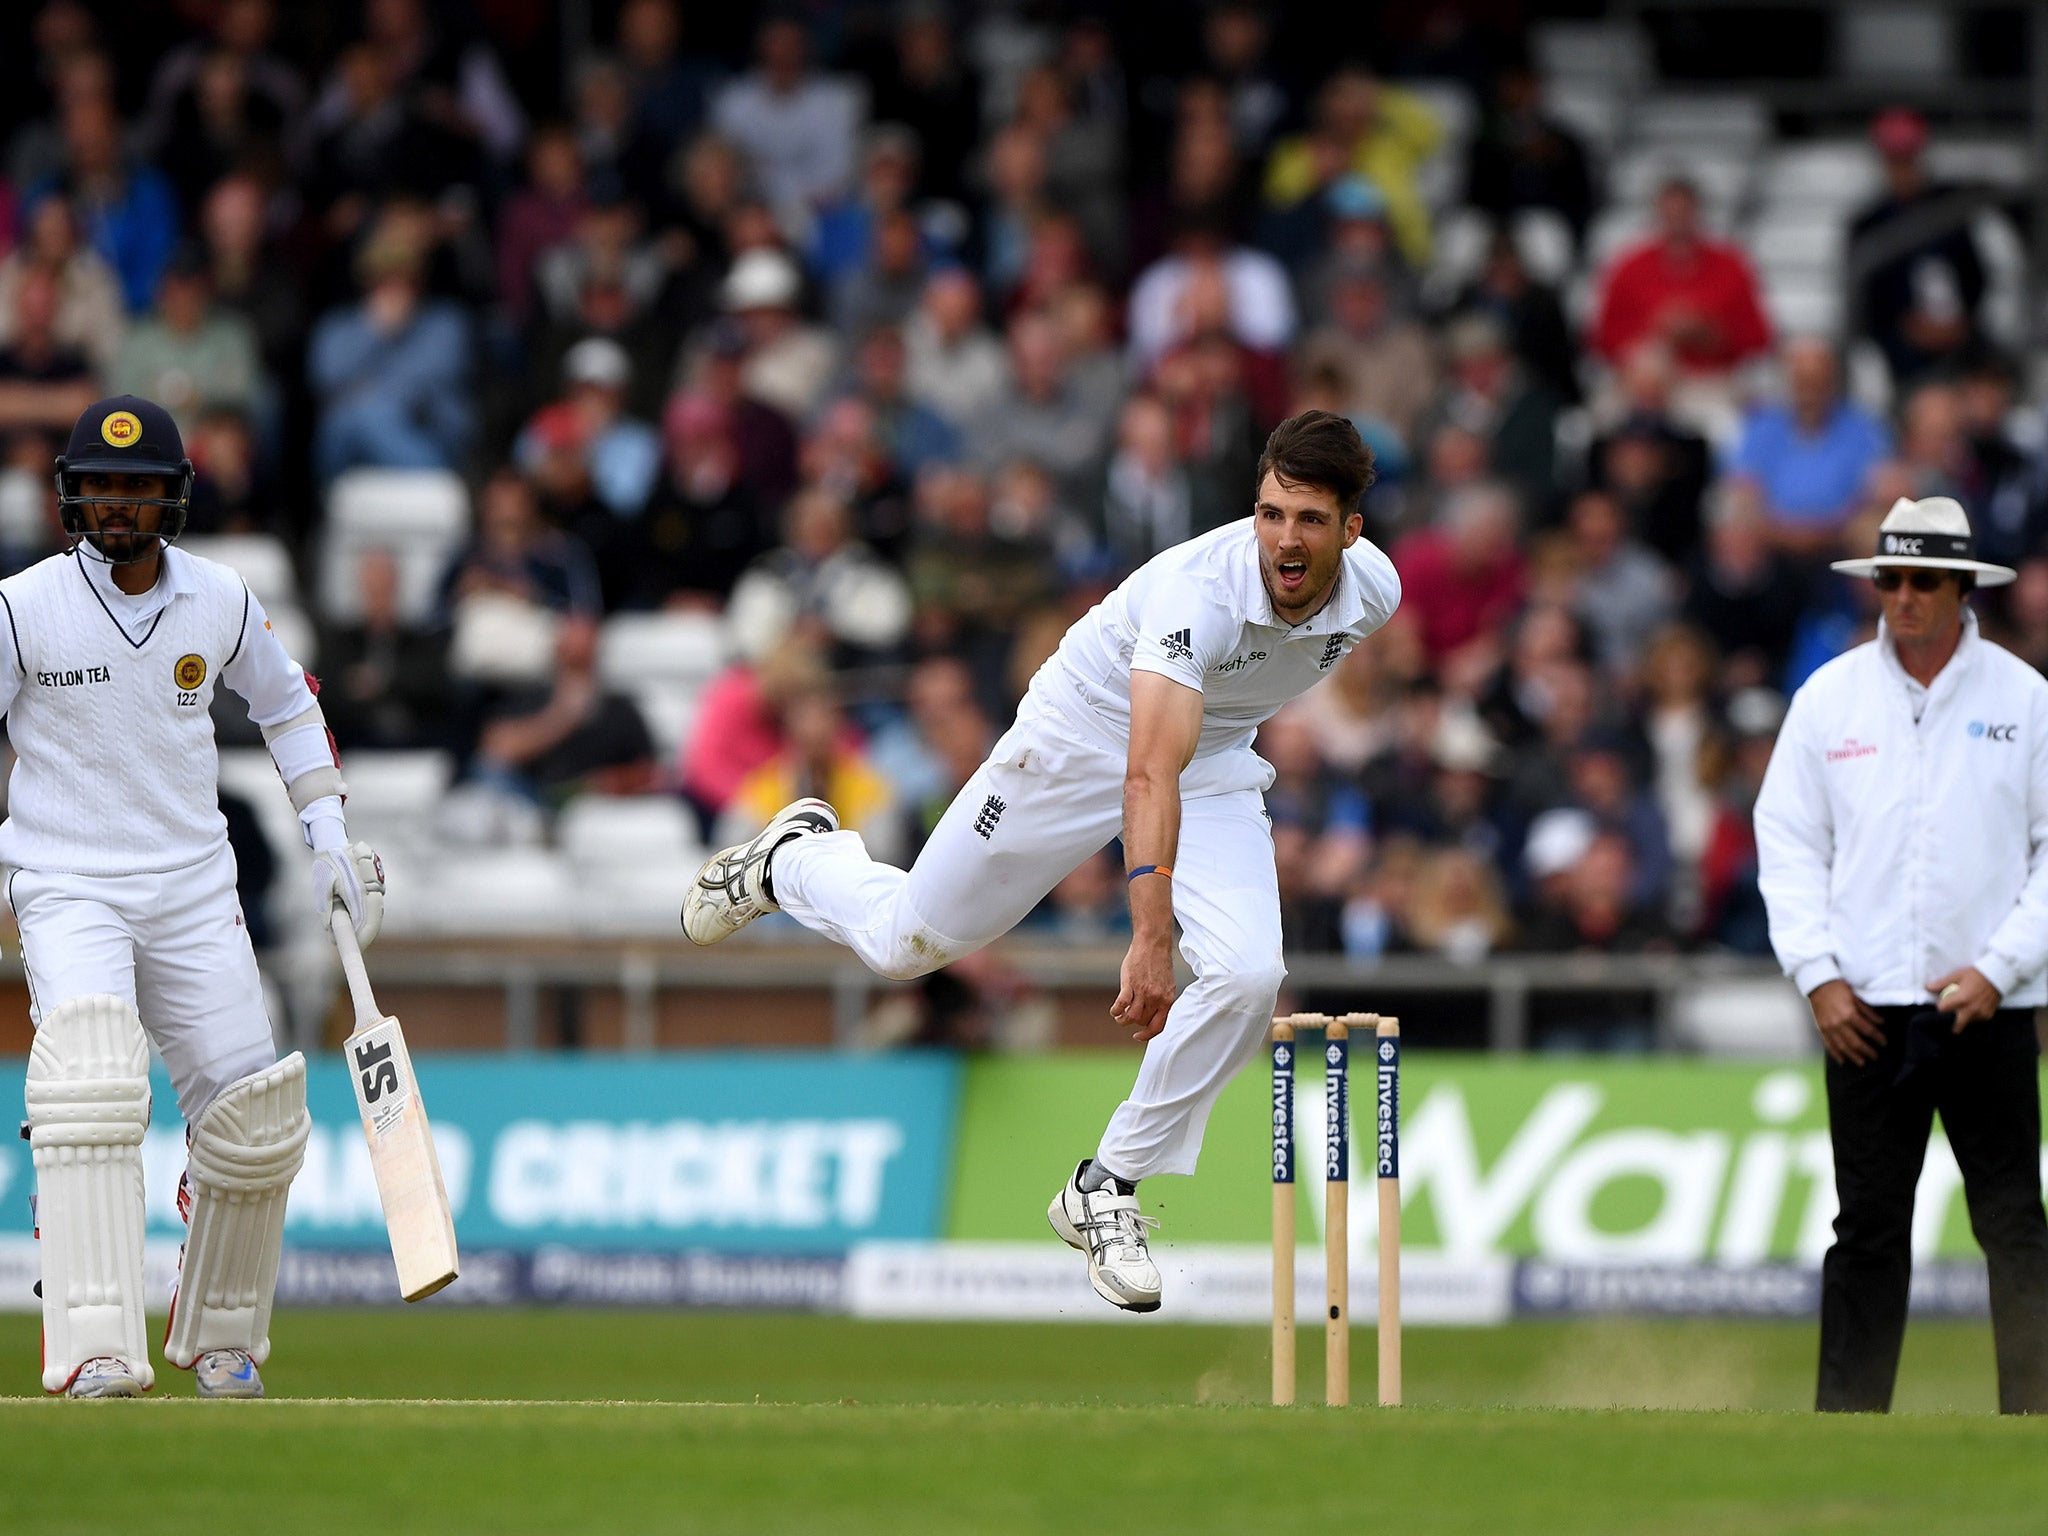 Steven Finn believes England can wrap up the series victory against Sri Lanka on Monday